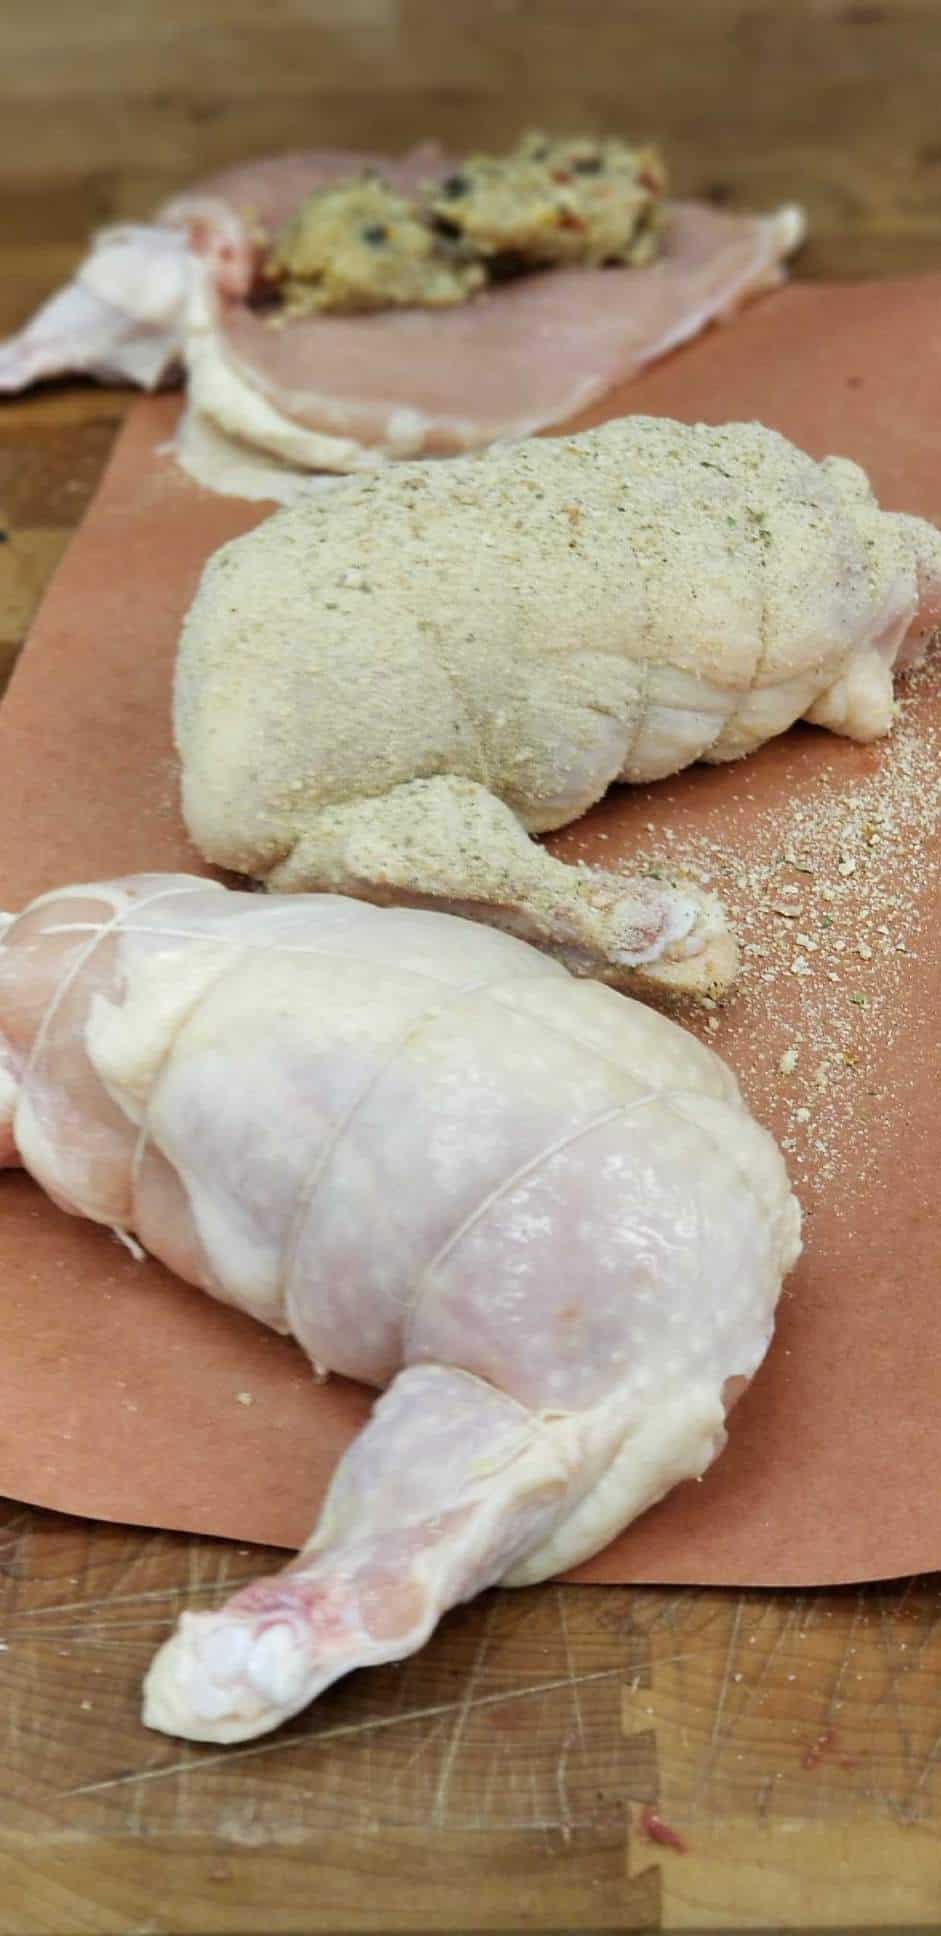 Frenched Stuffed Chicken Breast - about 1lb each